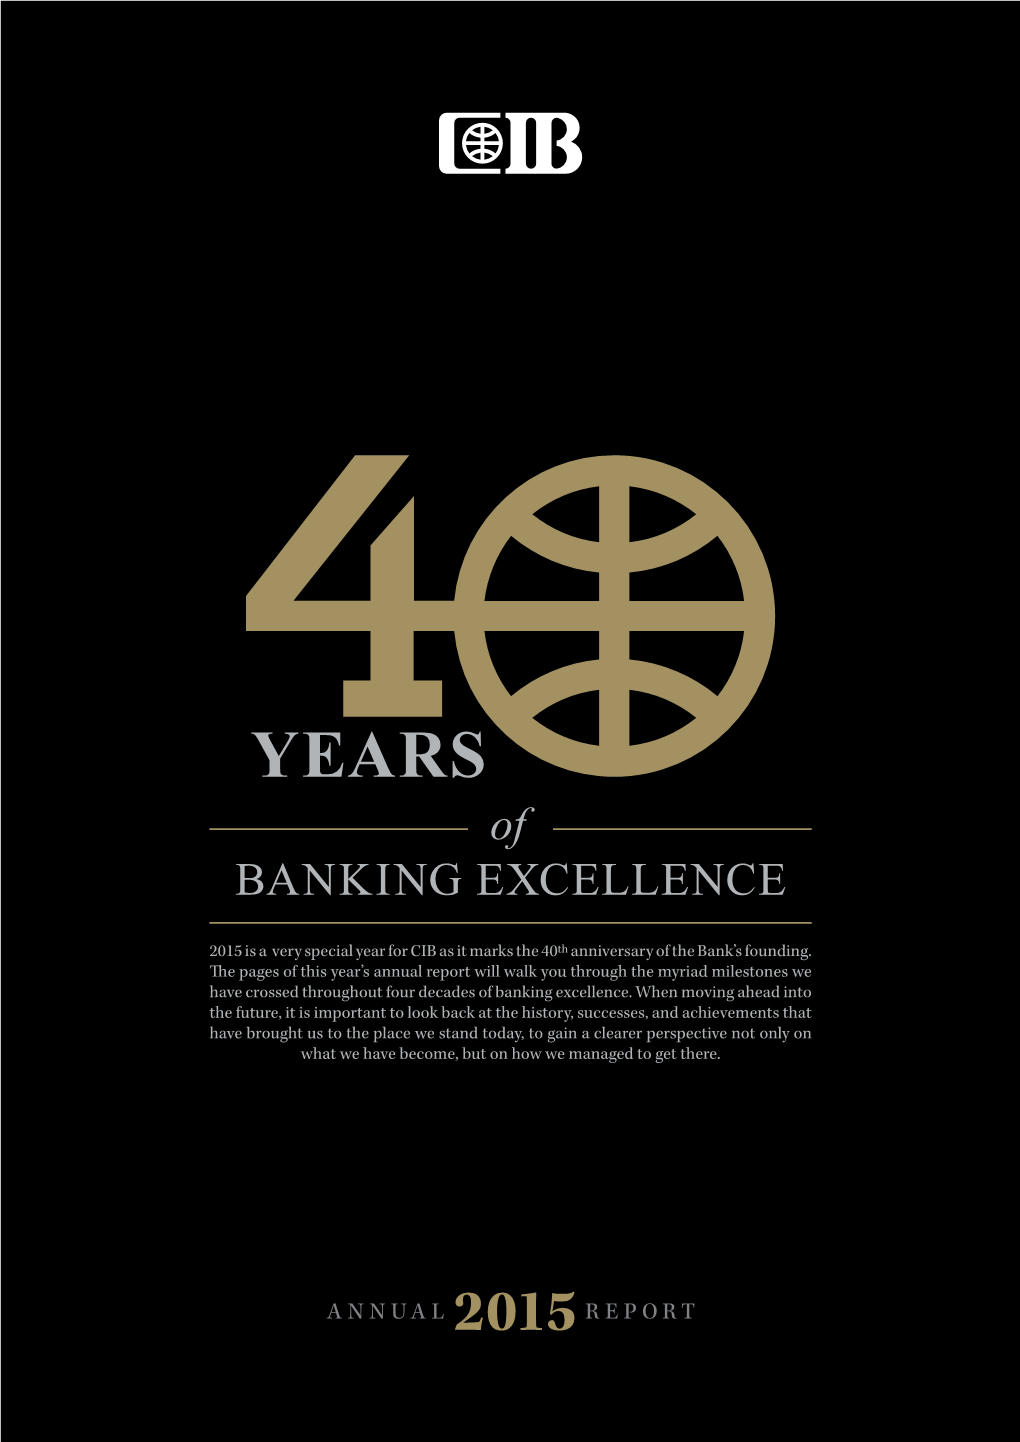 2015 Is a Very Special Year for CIB As It Marks the 40Th Anniversary of the Bank's Founding. the Pages of This Year's Annua